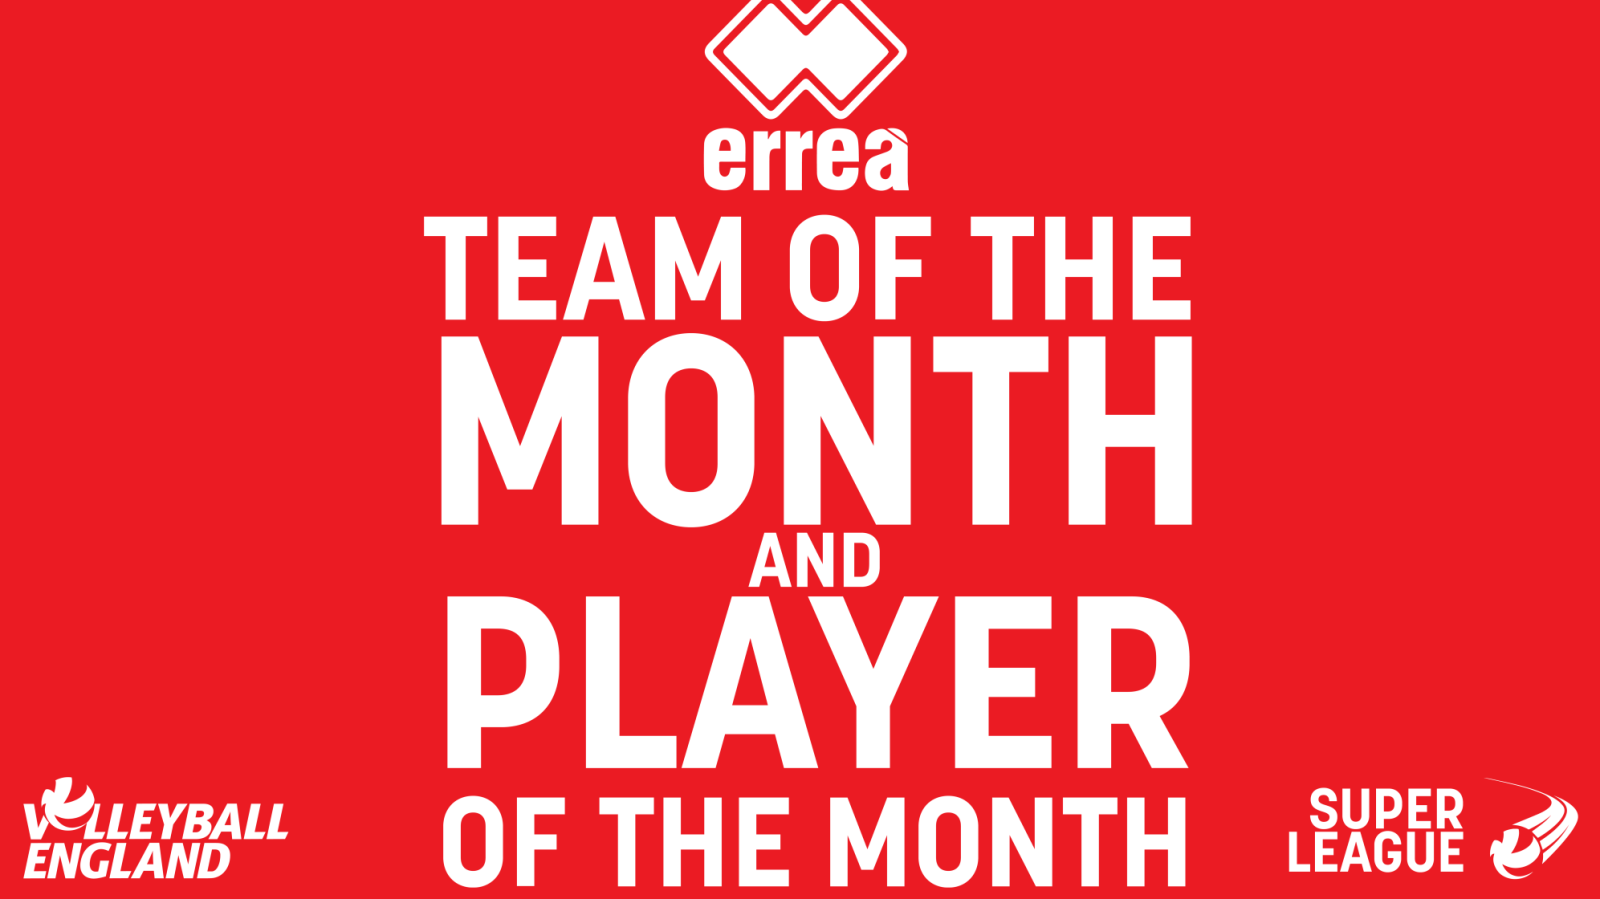 Super League Teams of the Month and Errea Players of the Month for February